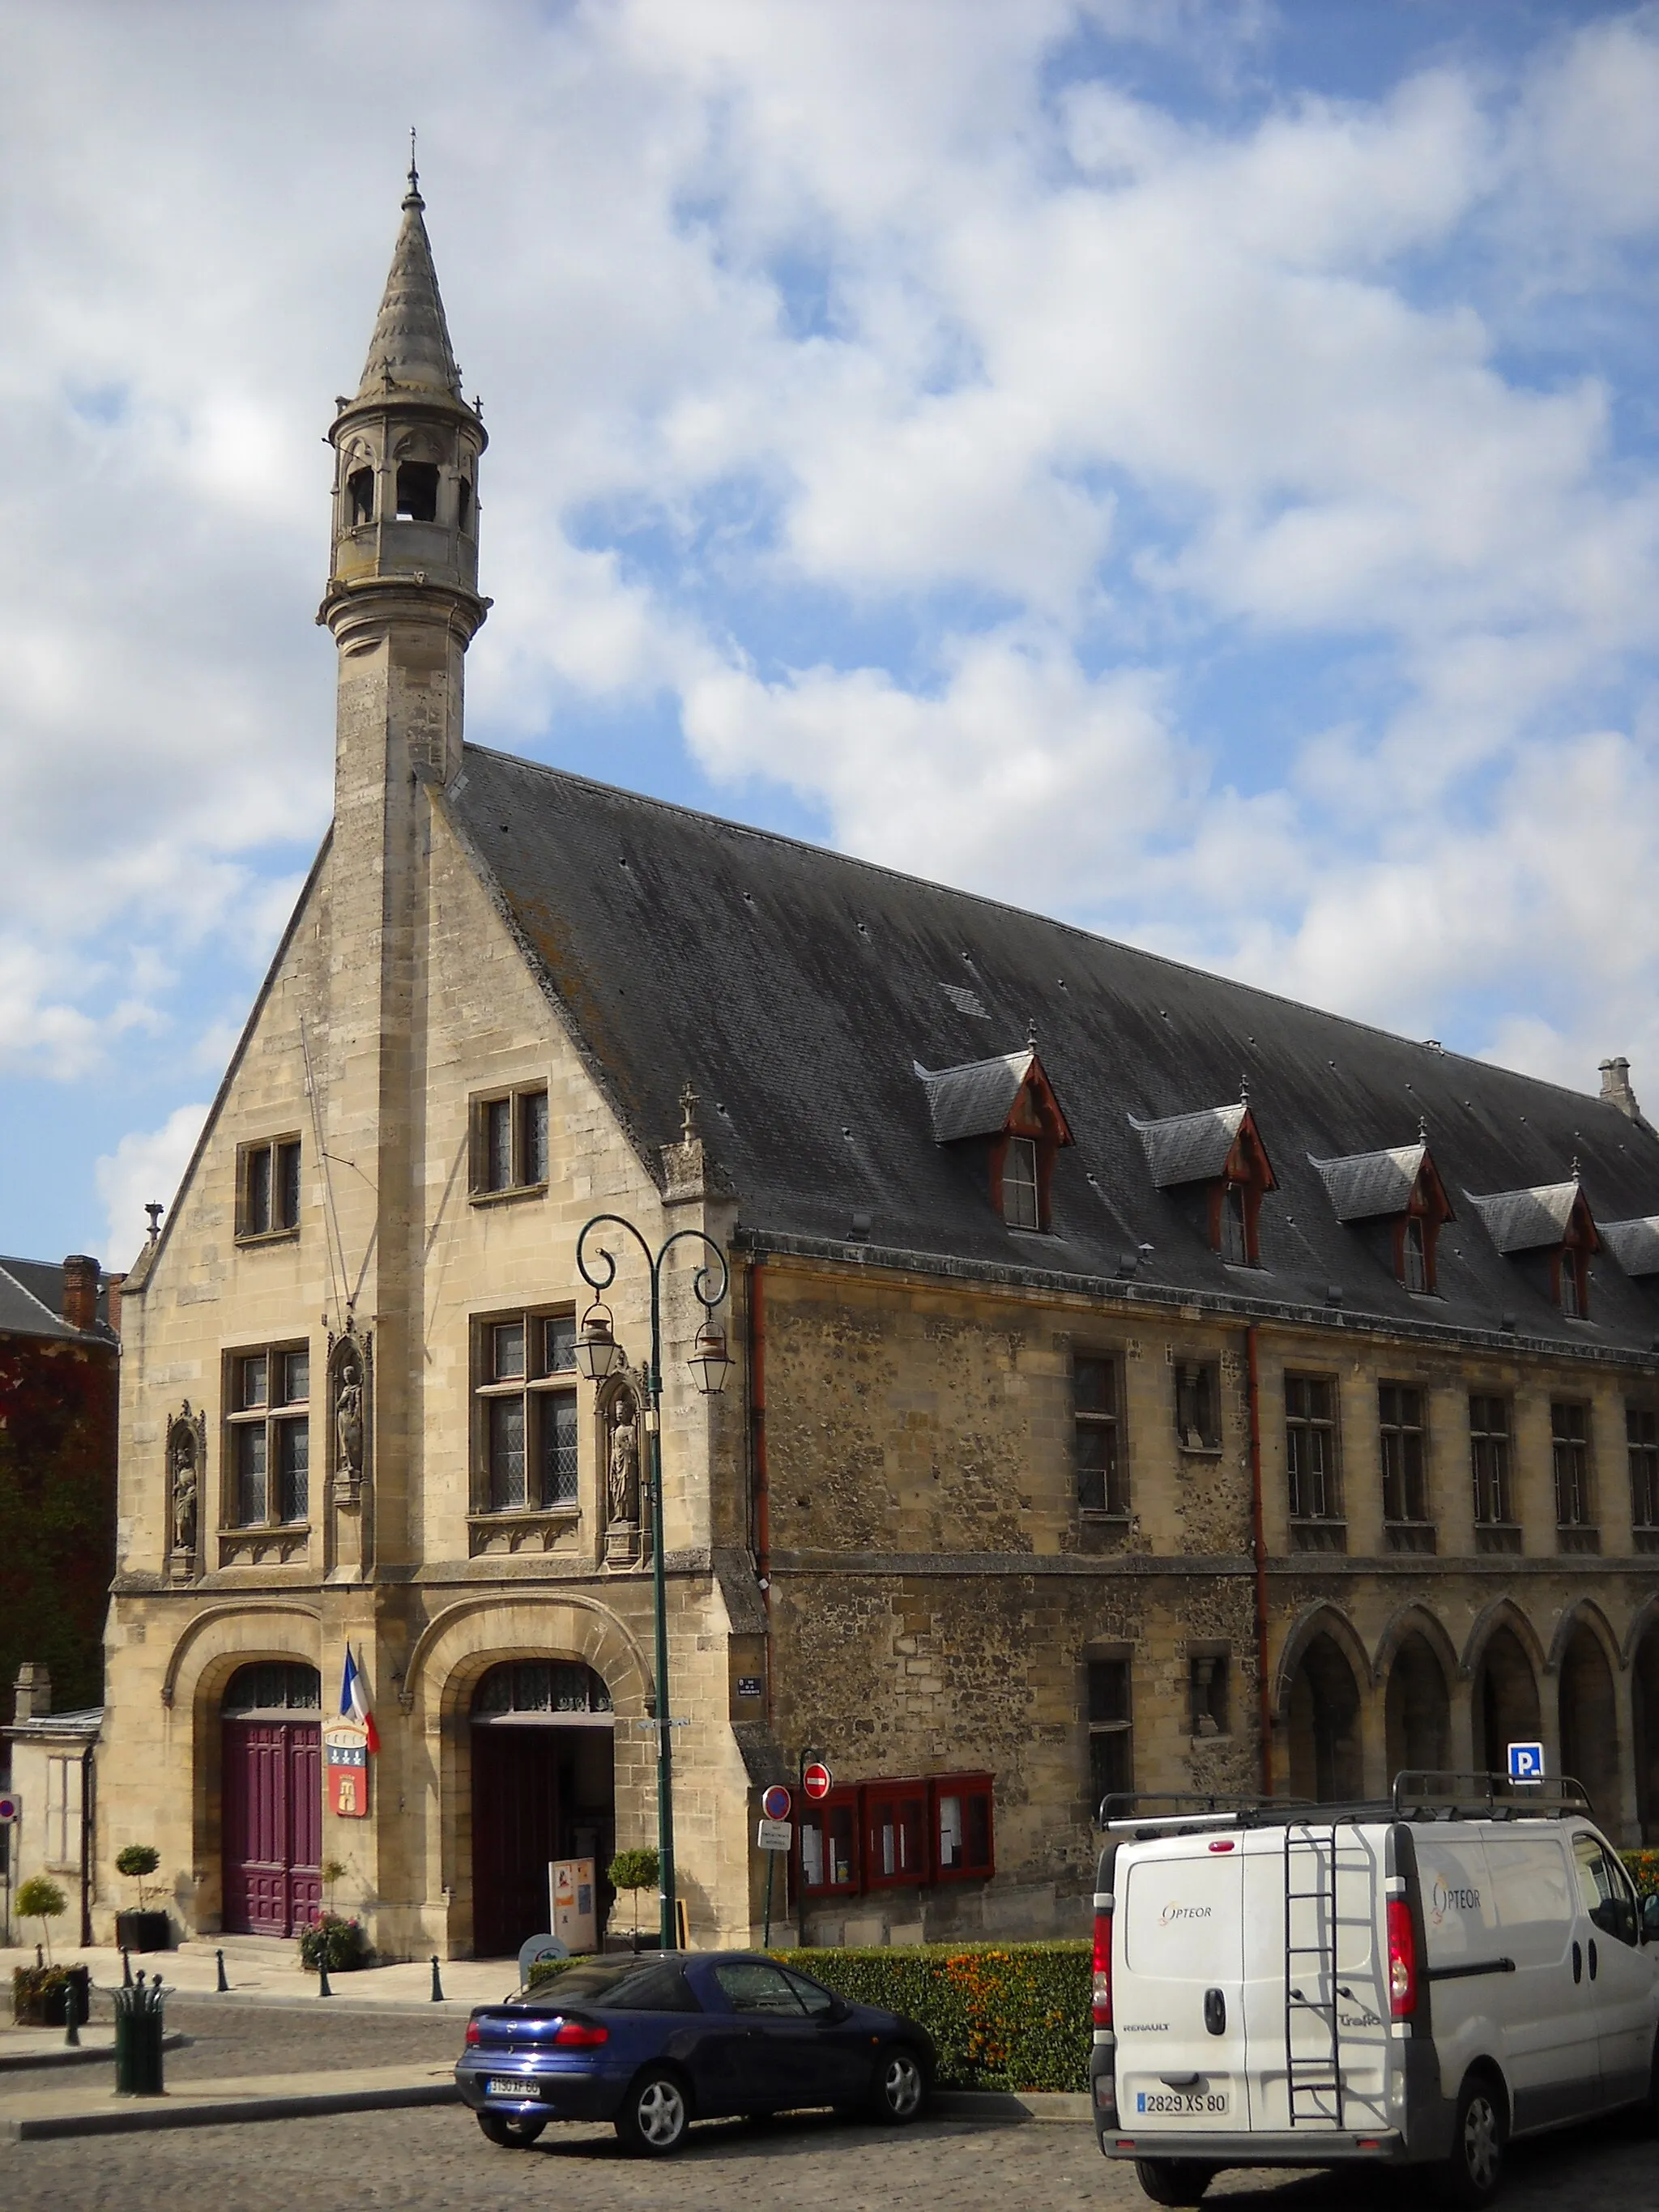 Photo showing: The town hall of Clermont, Oise, France.